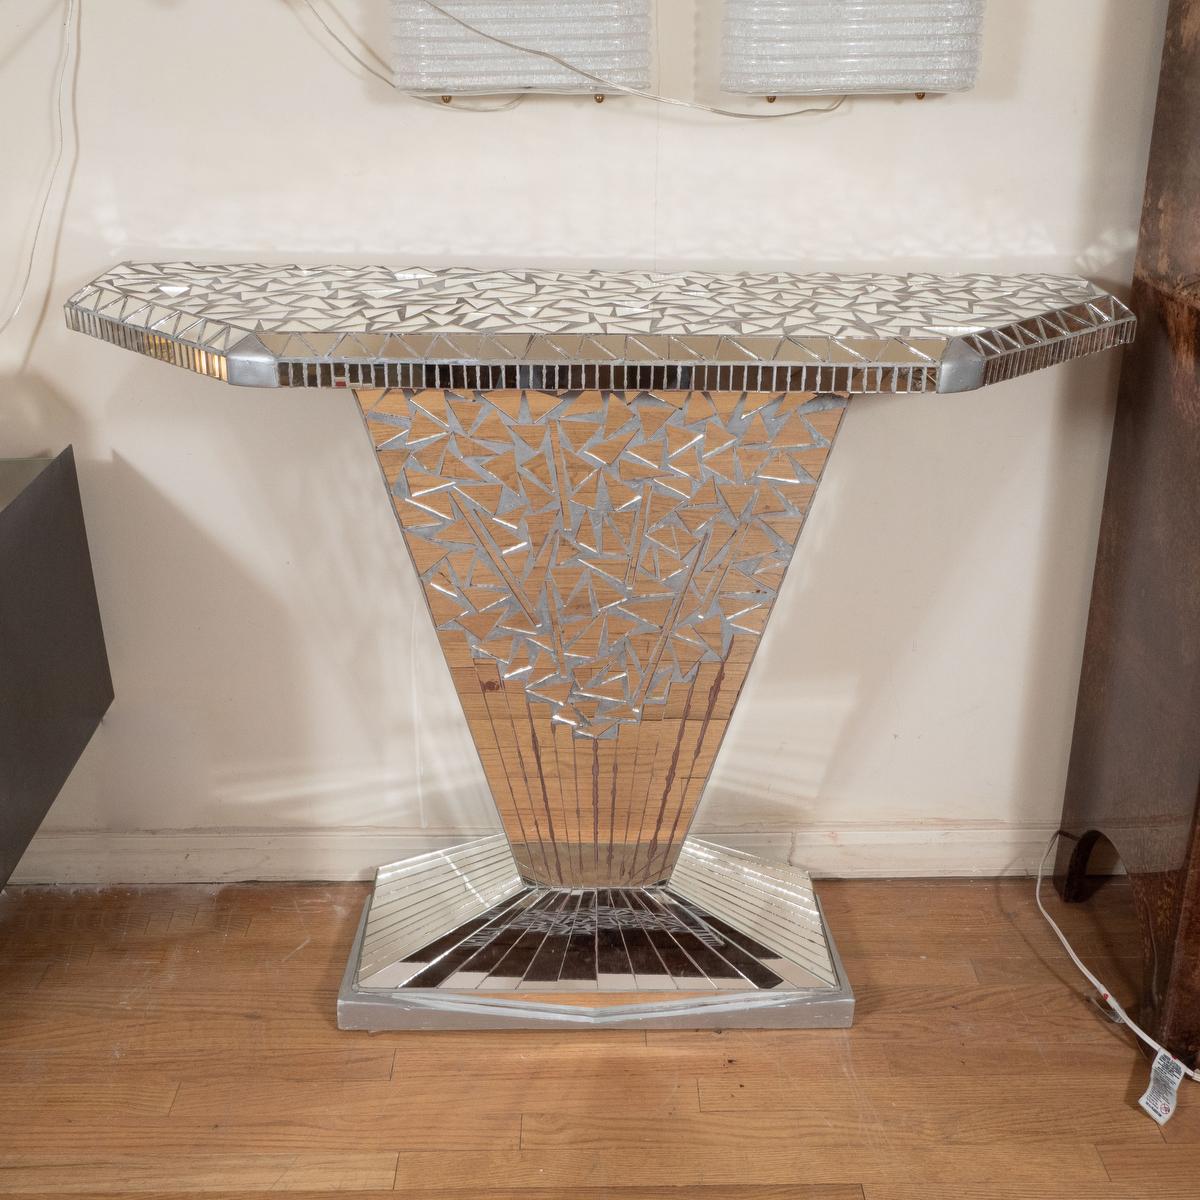 Mirrored mosaic console.